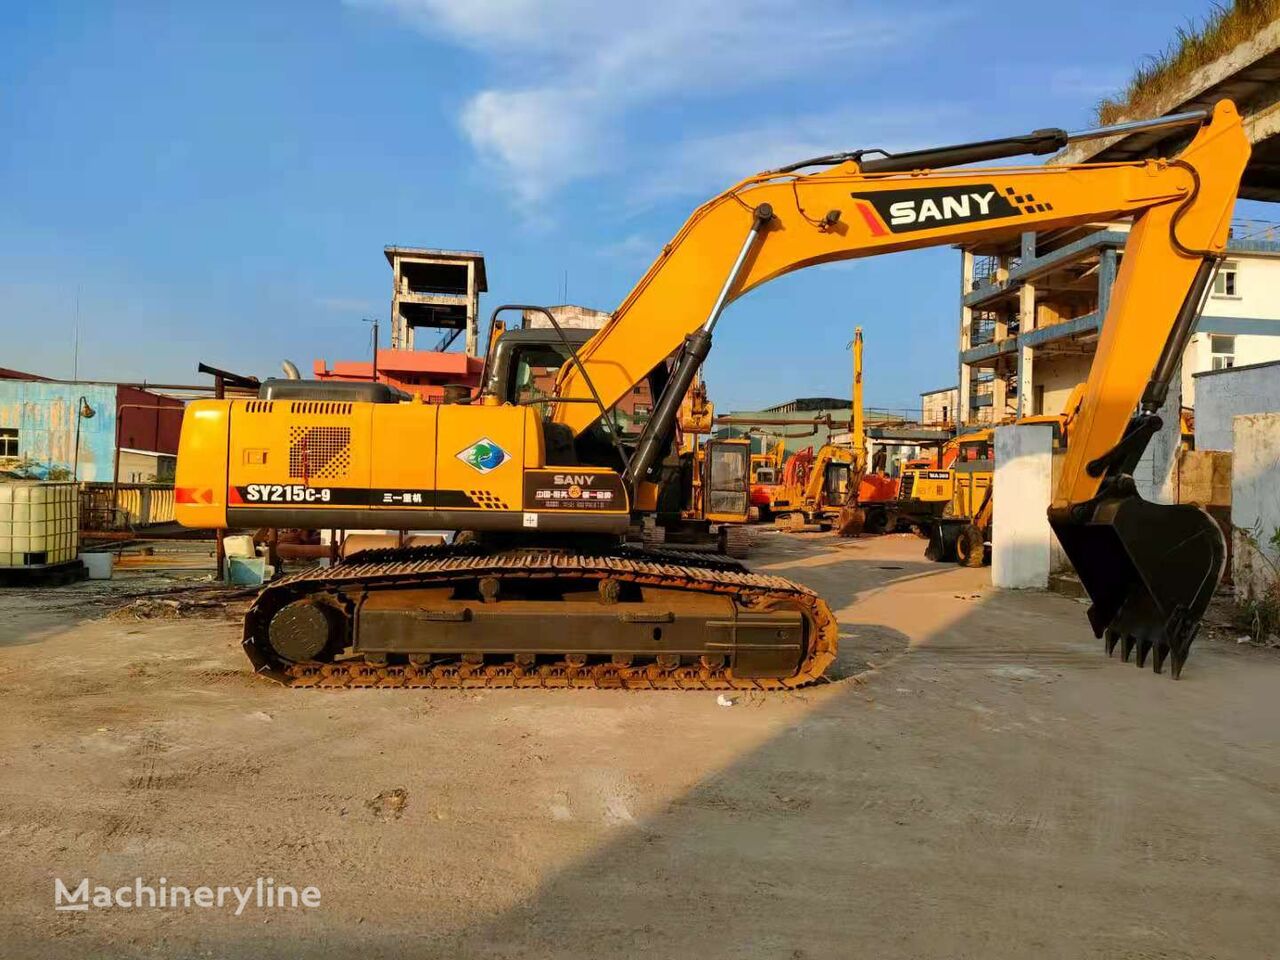 Sany tracked excavator for sale China, DU26130